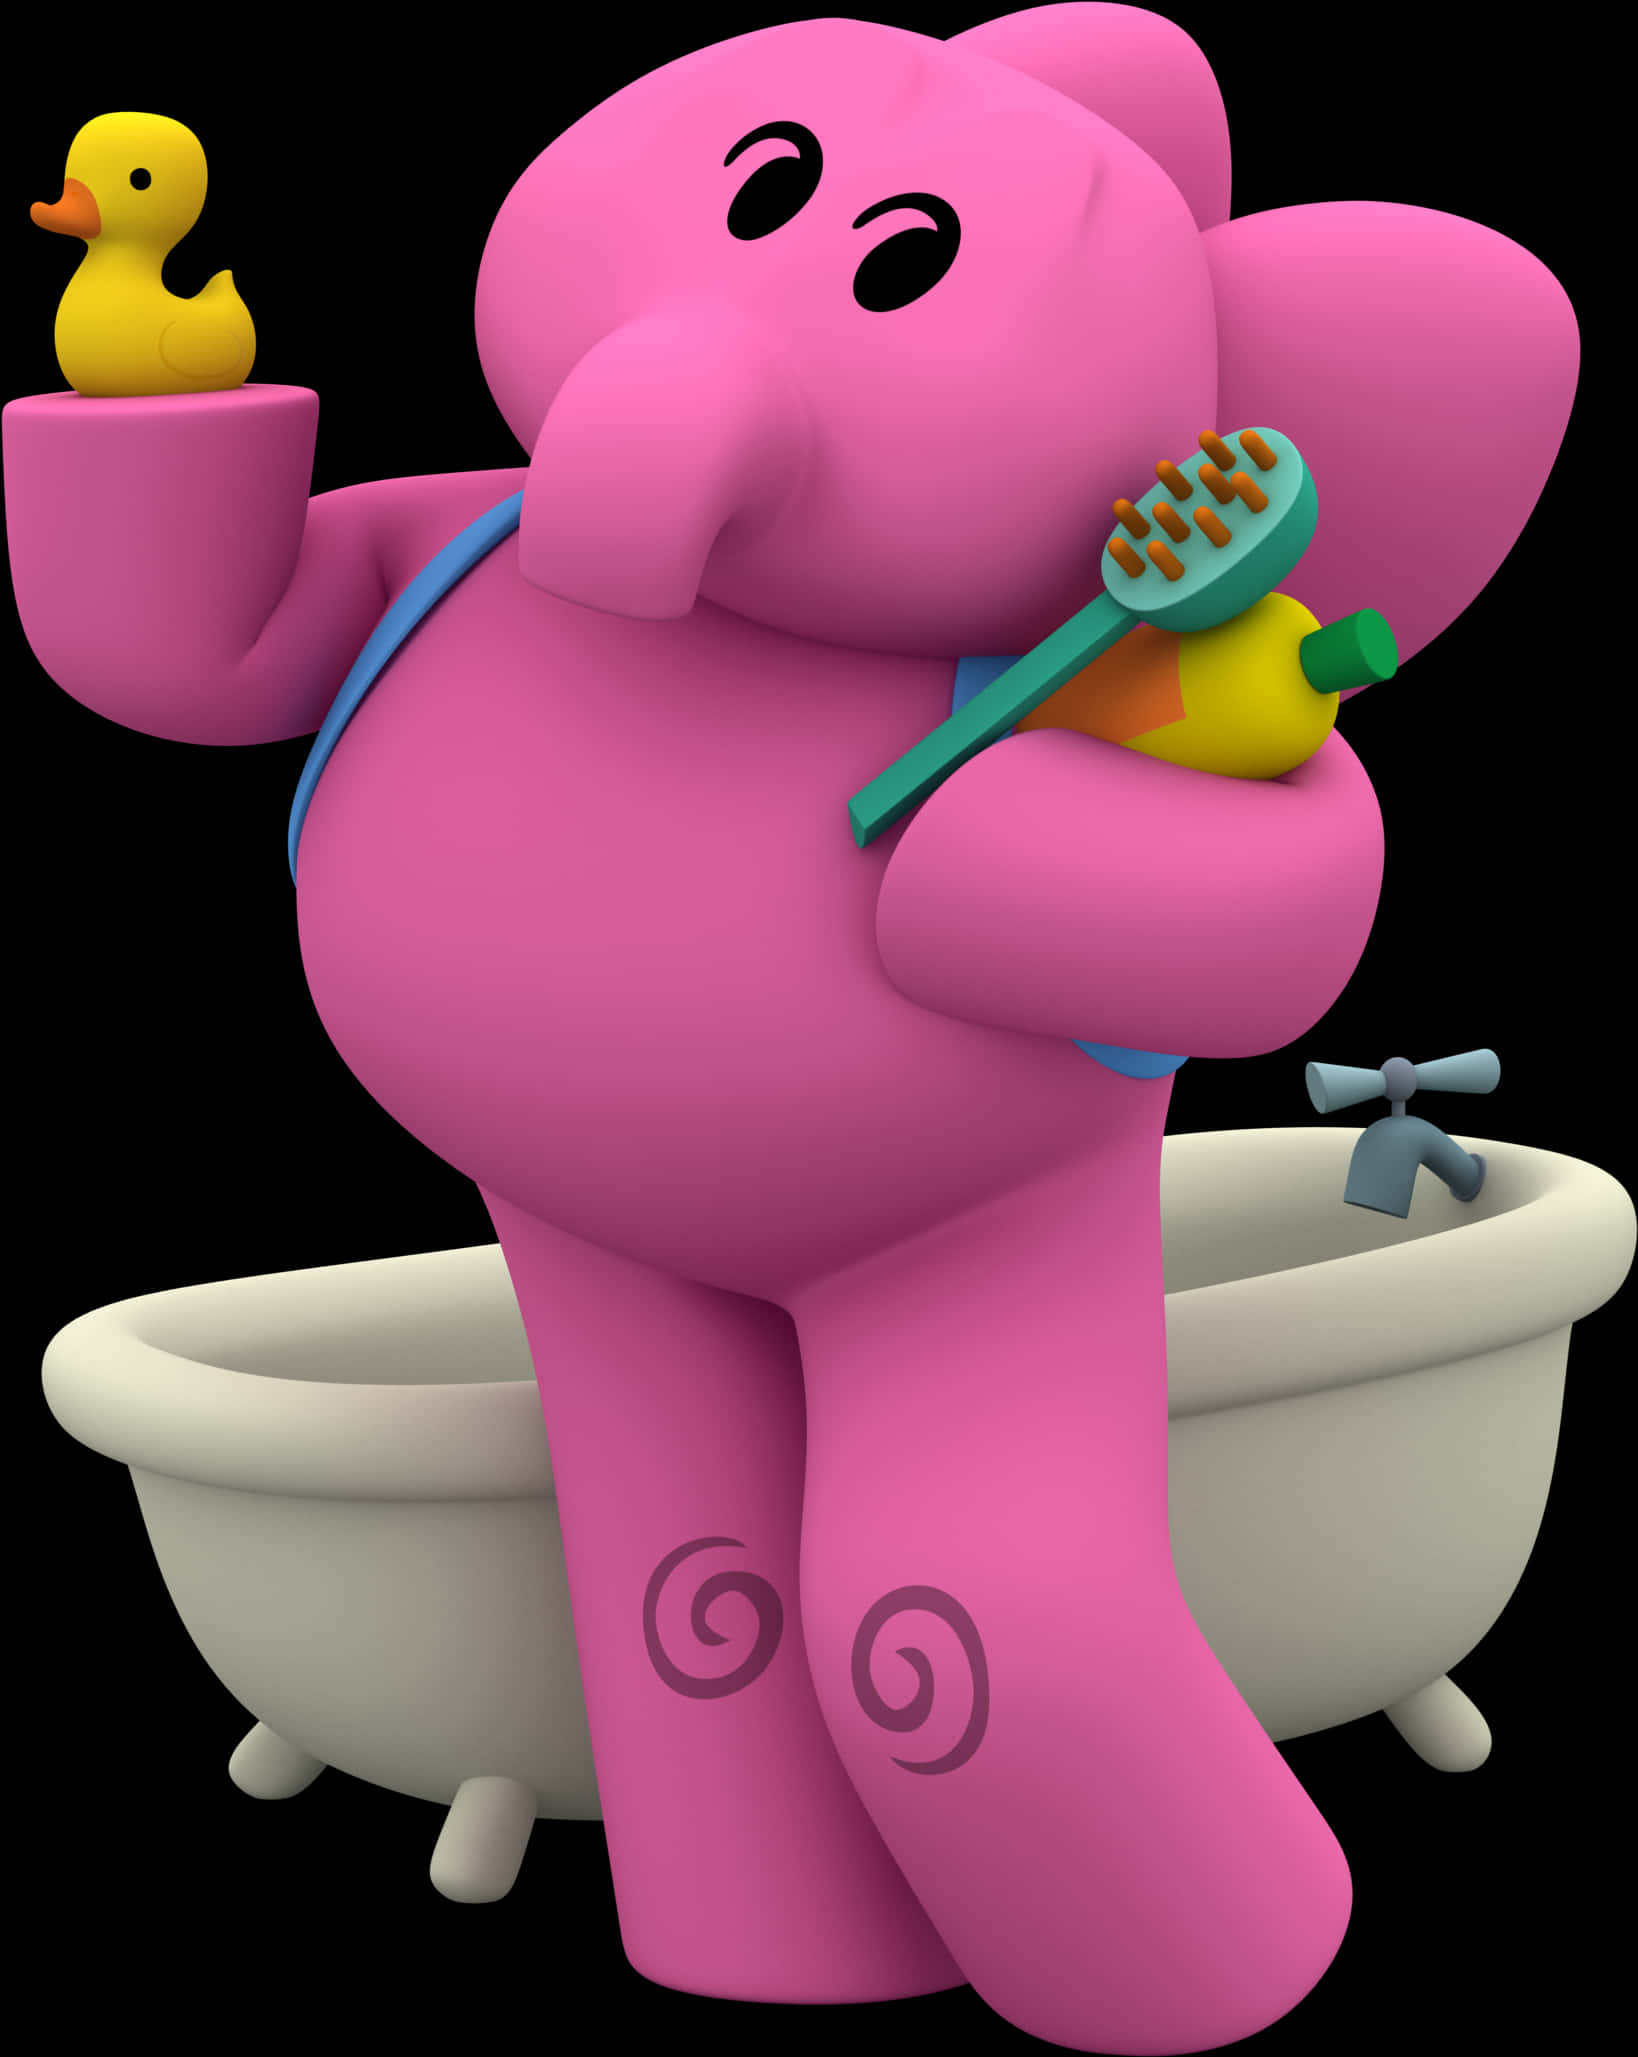 A Cartoon Pink Elephant Holding A Bathtub And A Yellow Duck